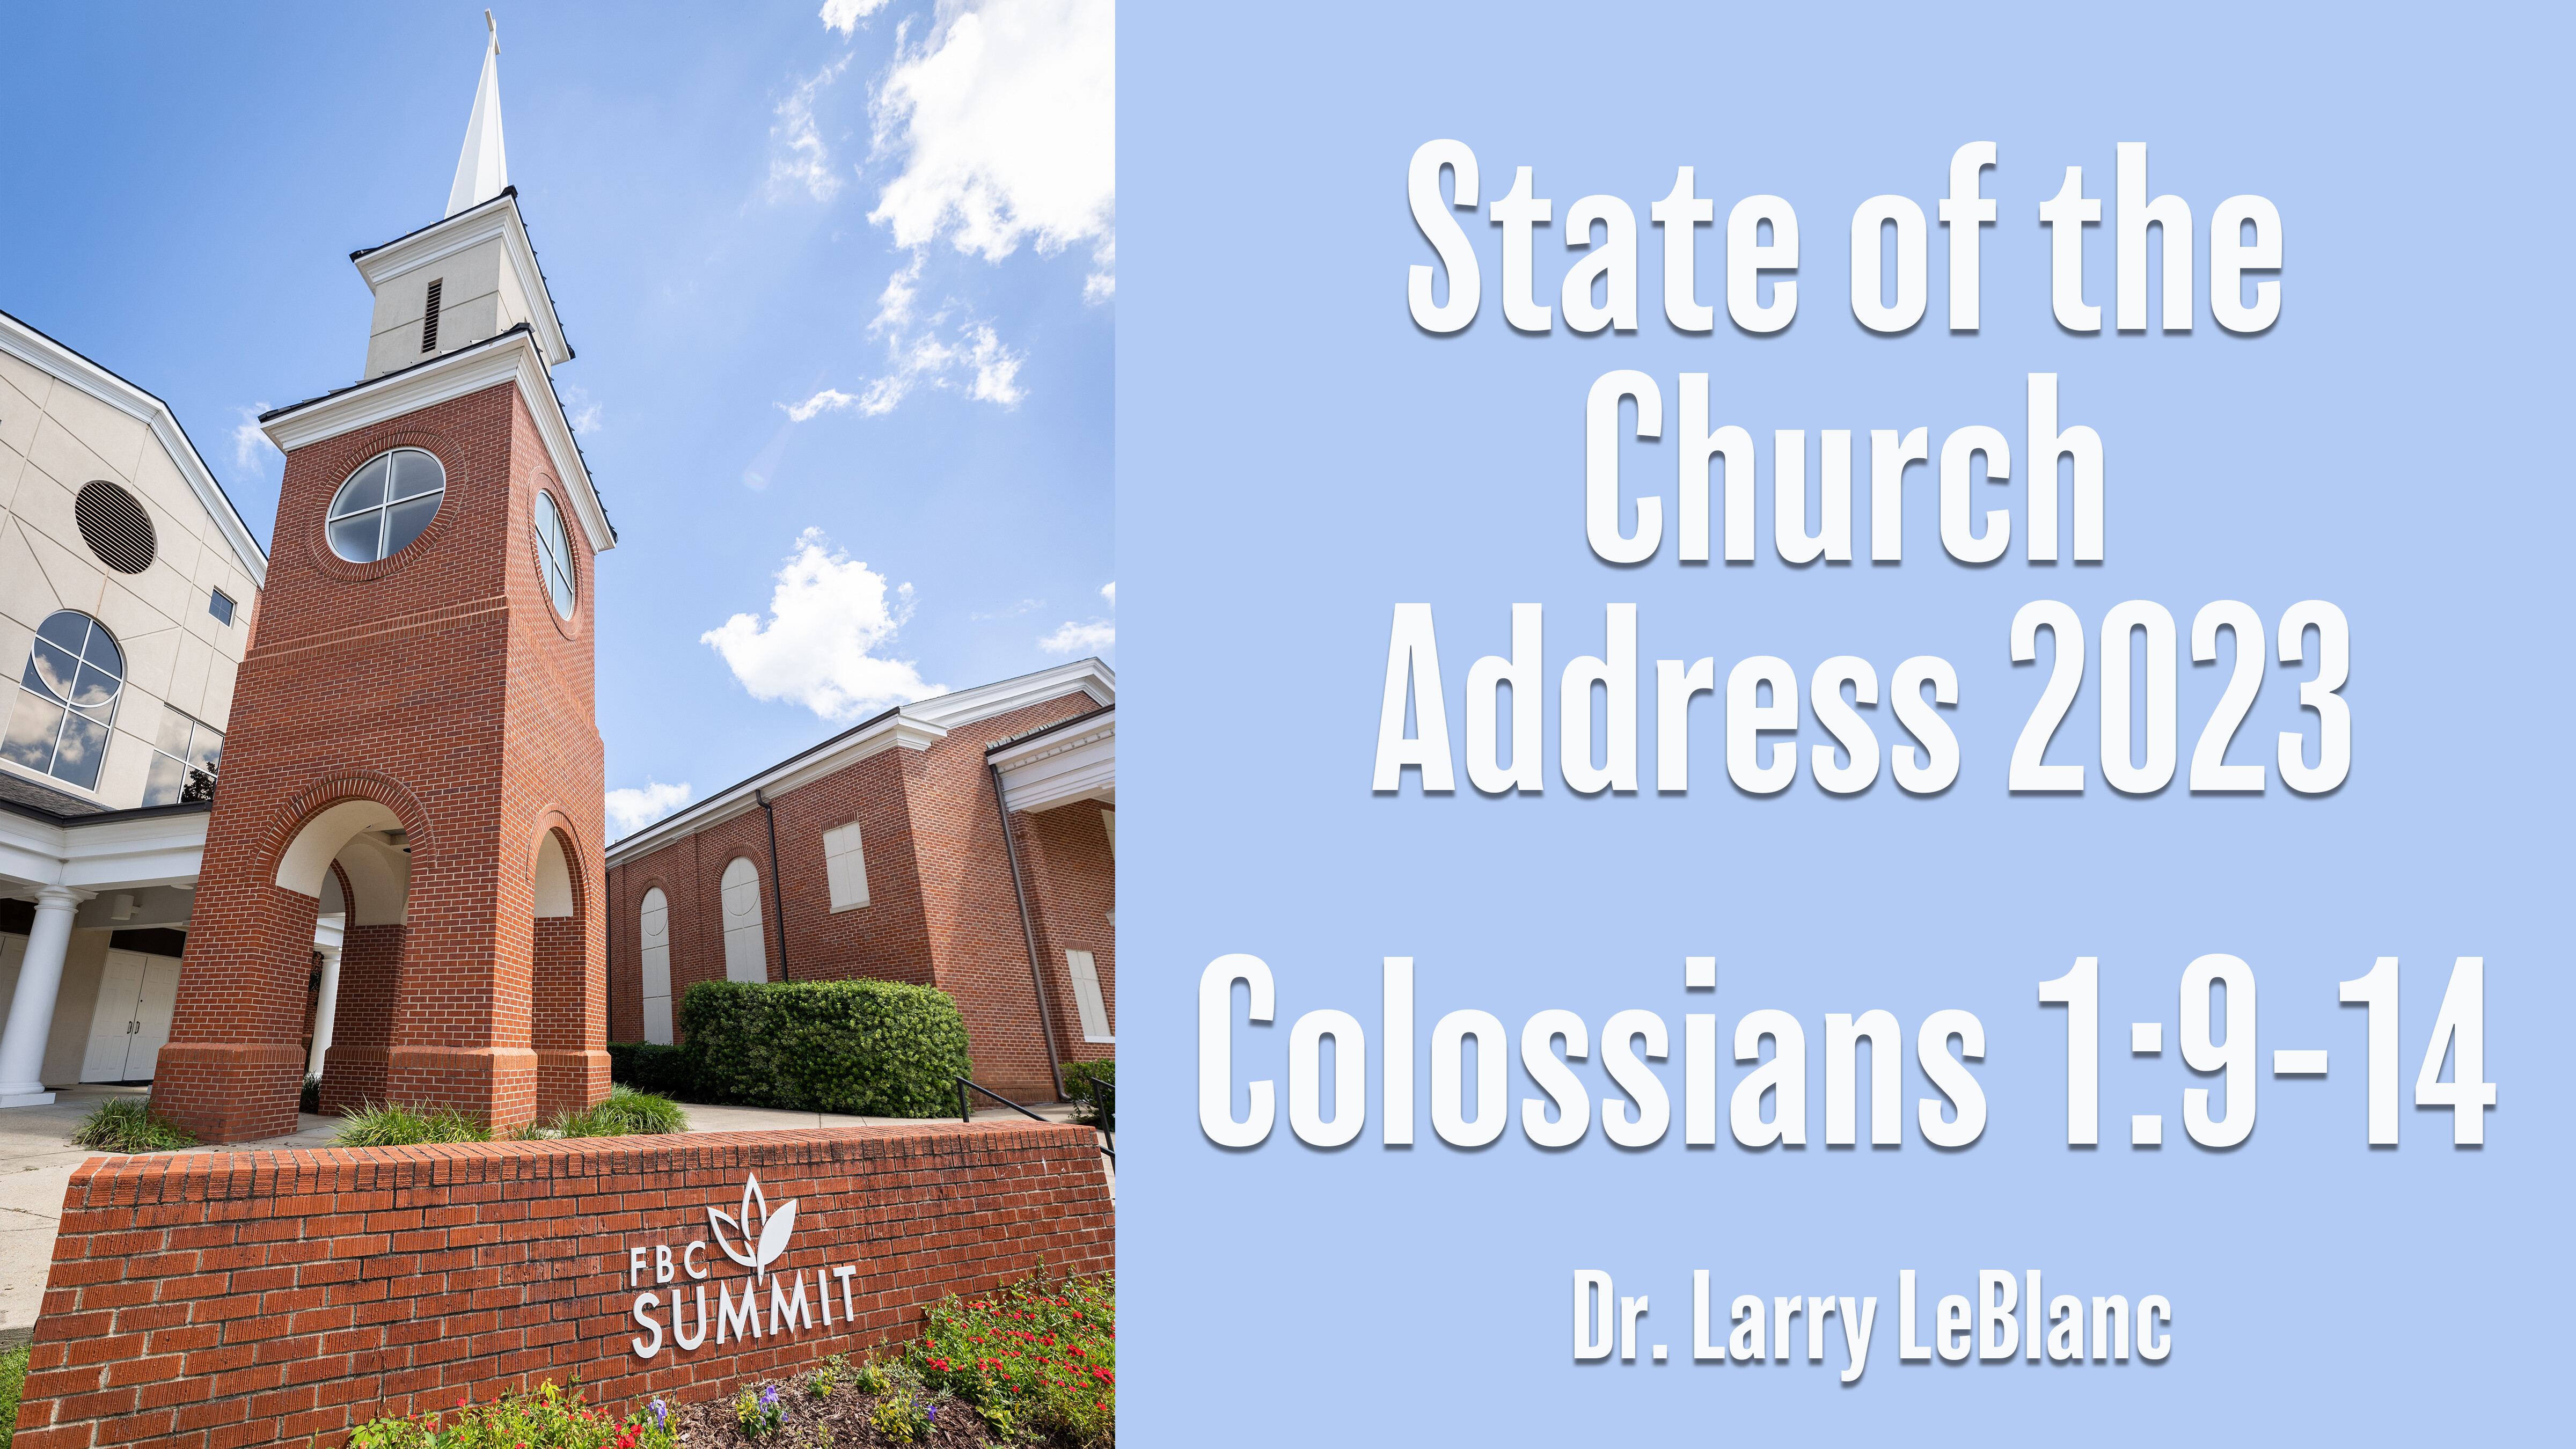 "State of the Church 2023" Colossians 1:9-14 // Dr. Larry LeBlanc